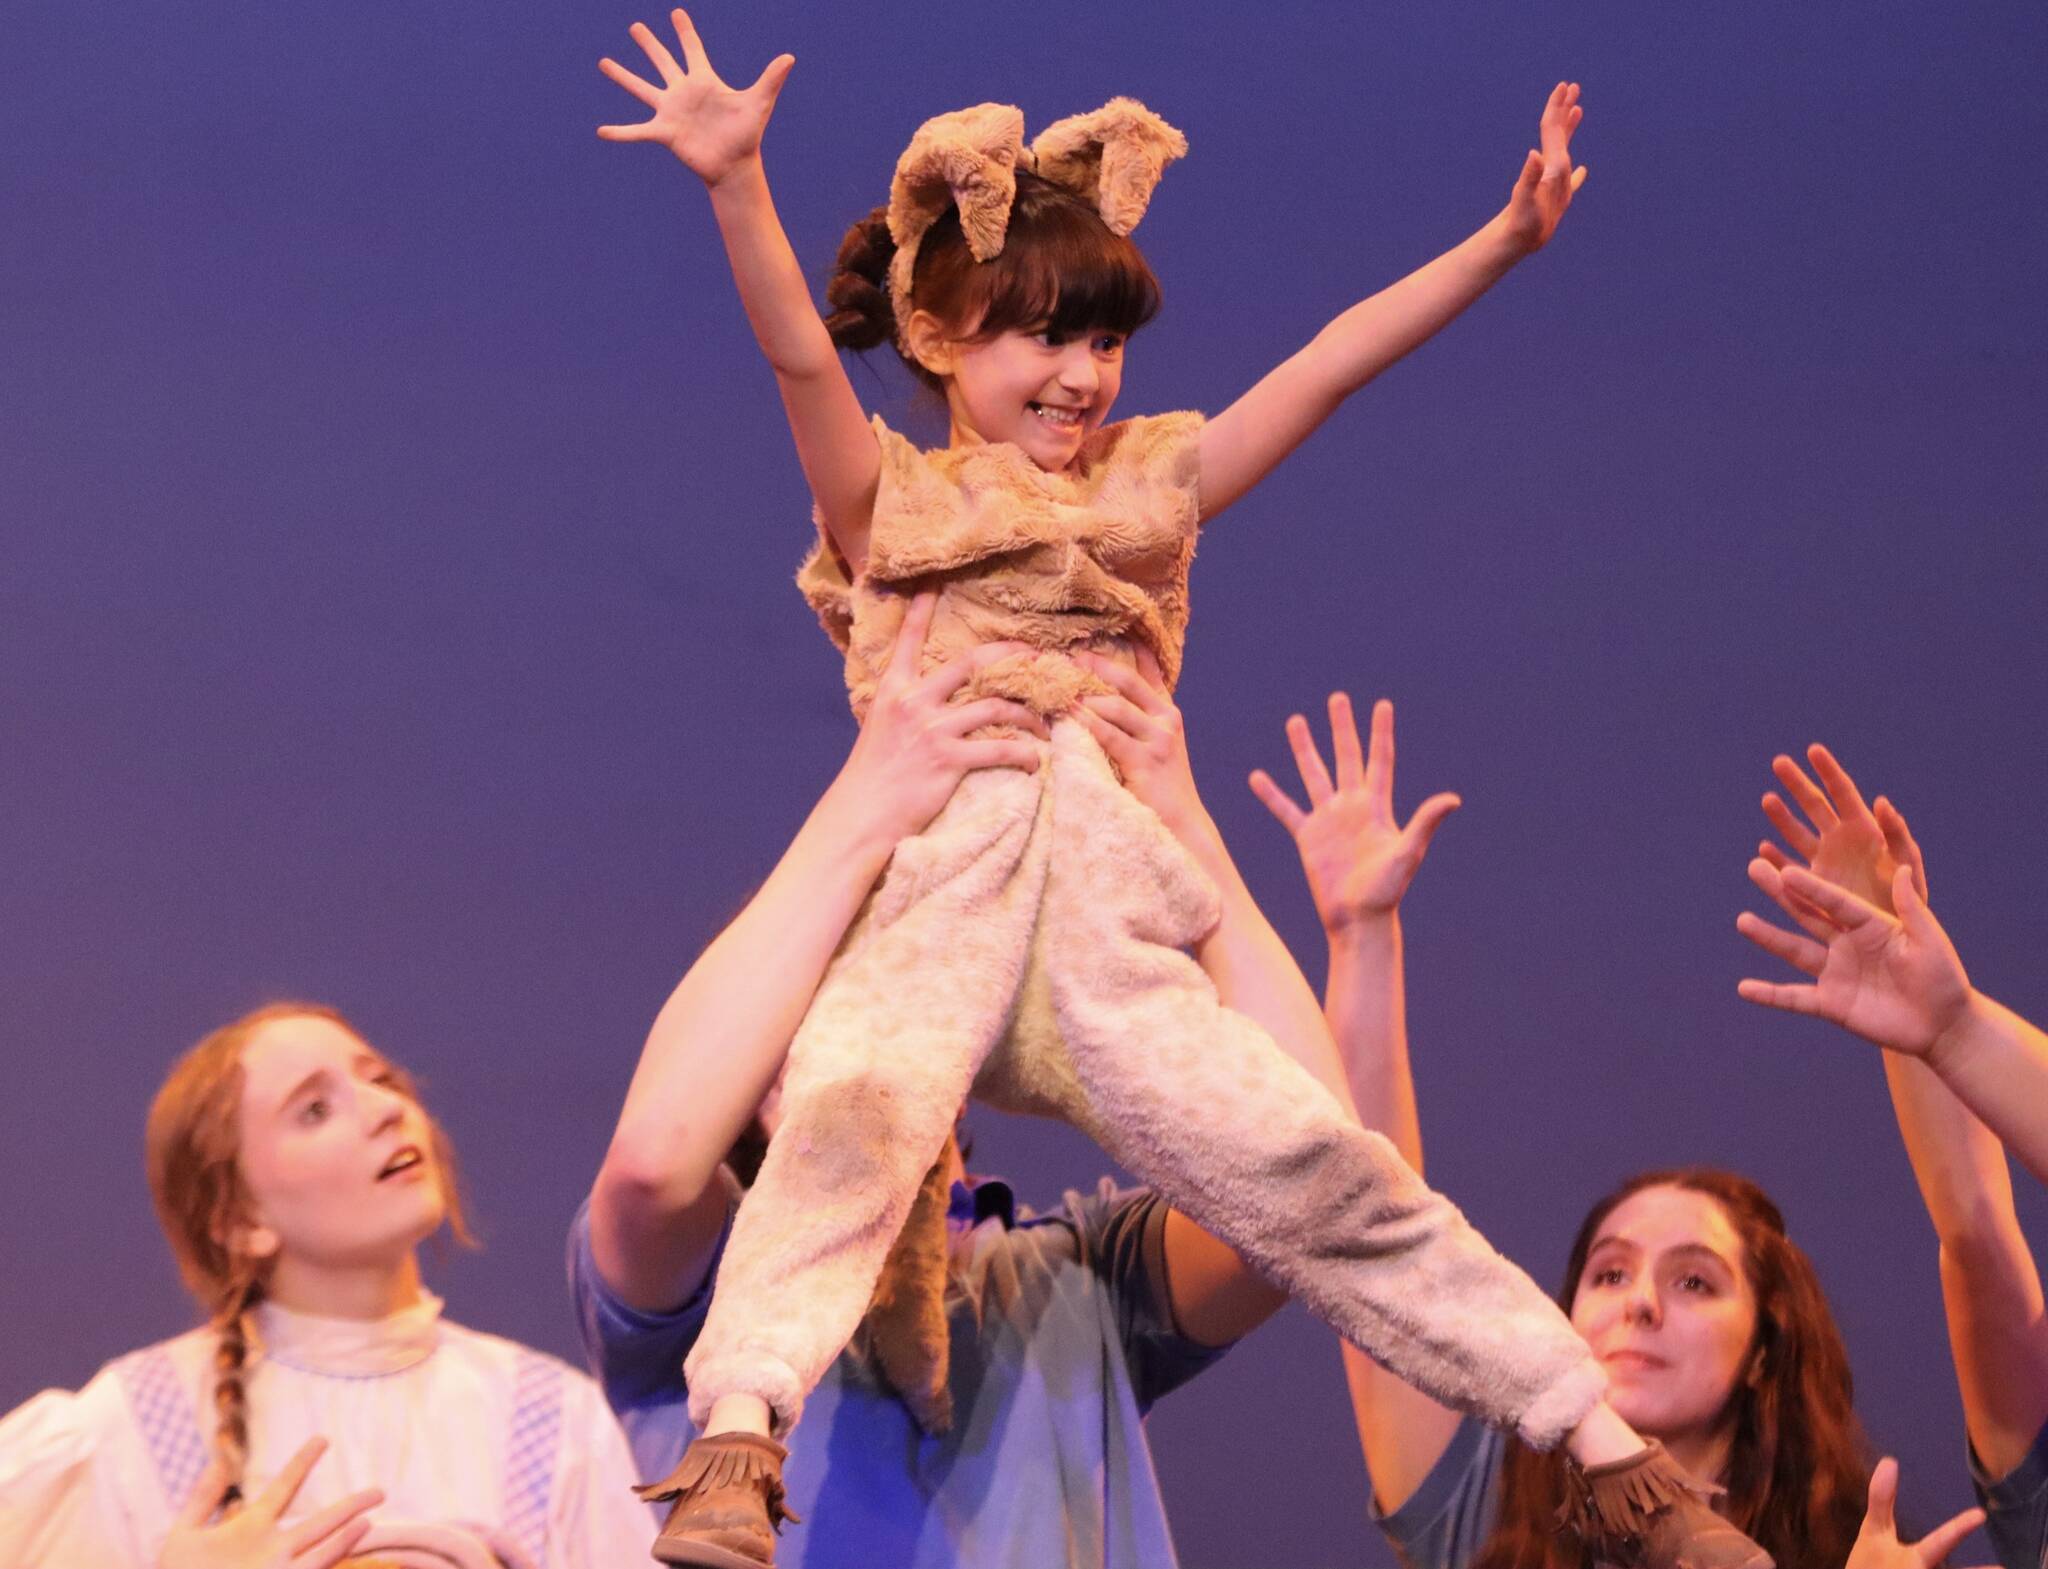 Delia Grimes,7, plays the part of Toto in this year’s rendition of “The Wizard of Oz”, which has a cast consisting of both JDHS and TMHS students and is performed at the JDHS auditorium. (Jonson Kuhn / Juneau Empire)